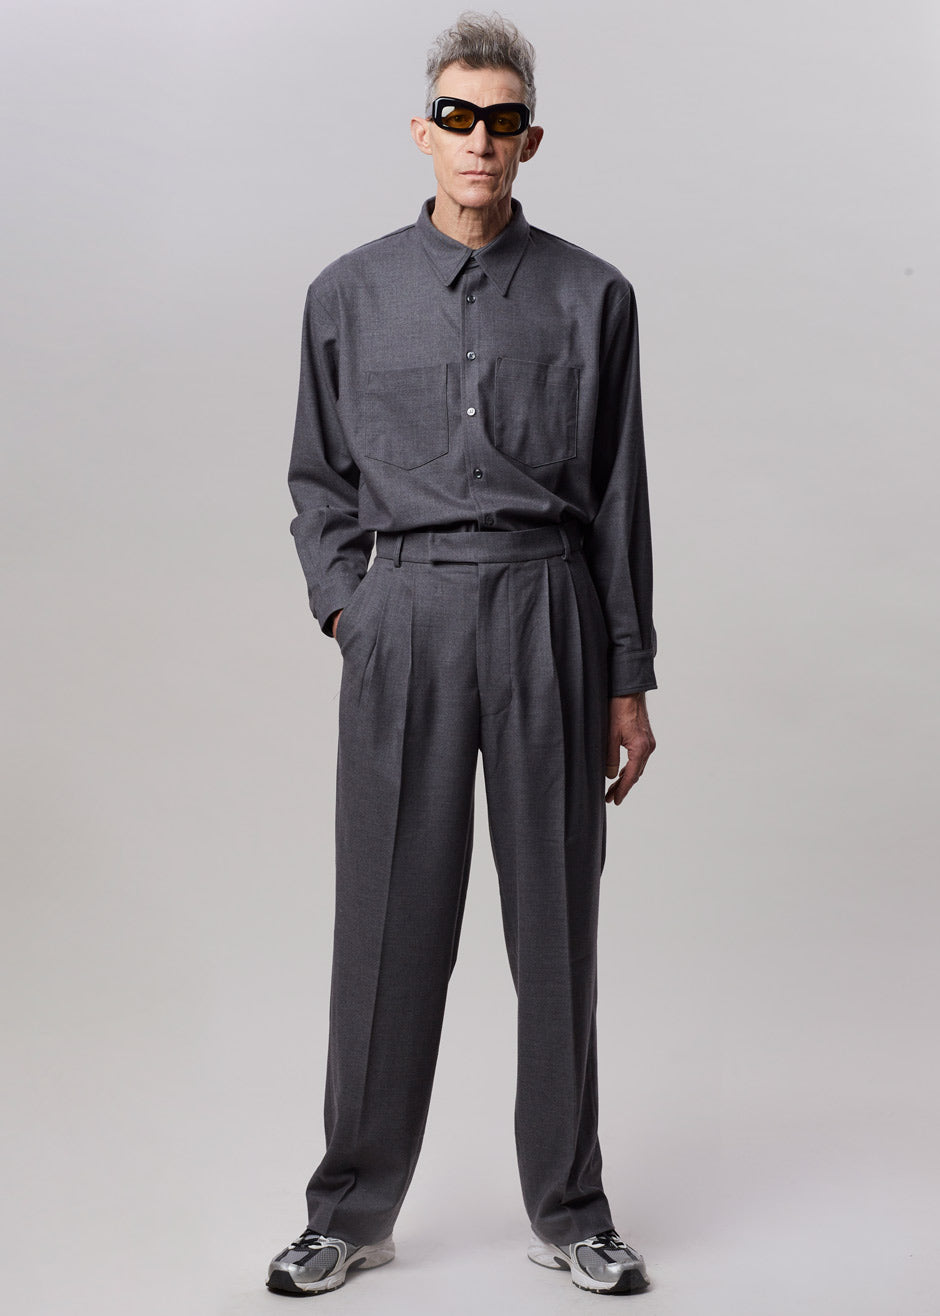 Heith Flanelle Suit Pants - Charcoal - 2